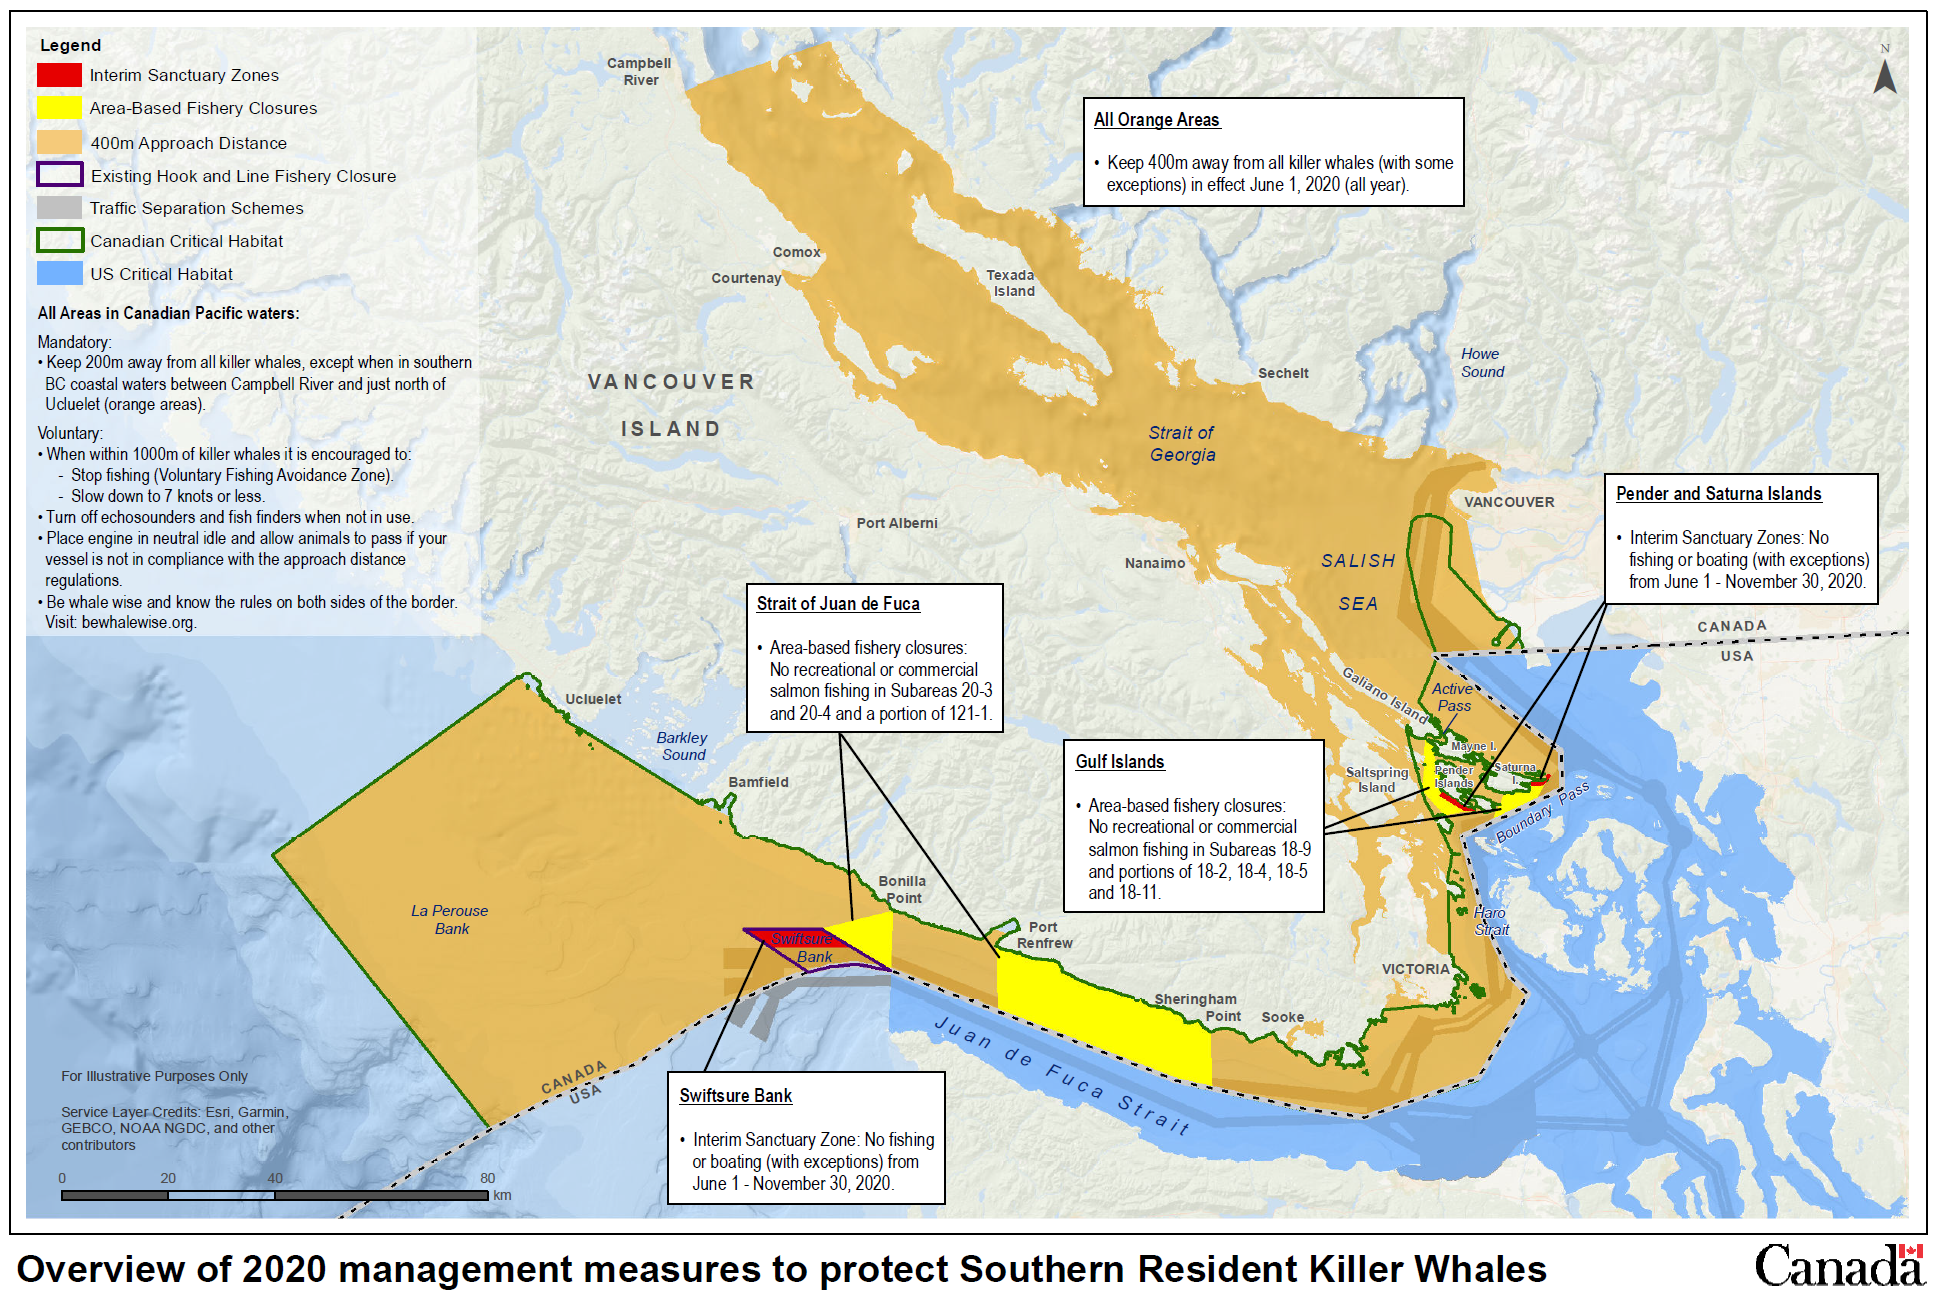 Overview of 2020 management measures to protect Southern Resident Killer Whales